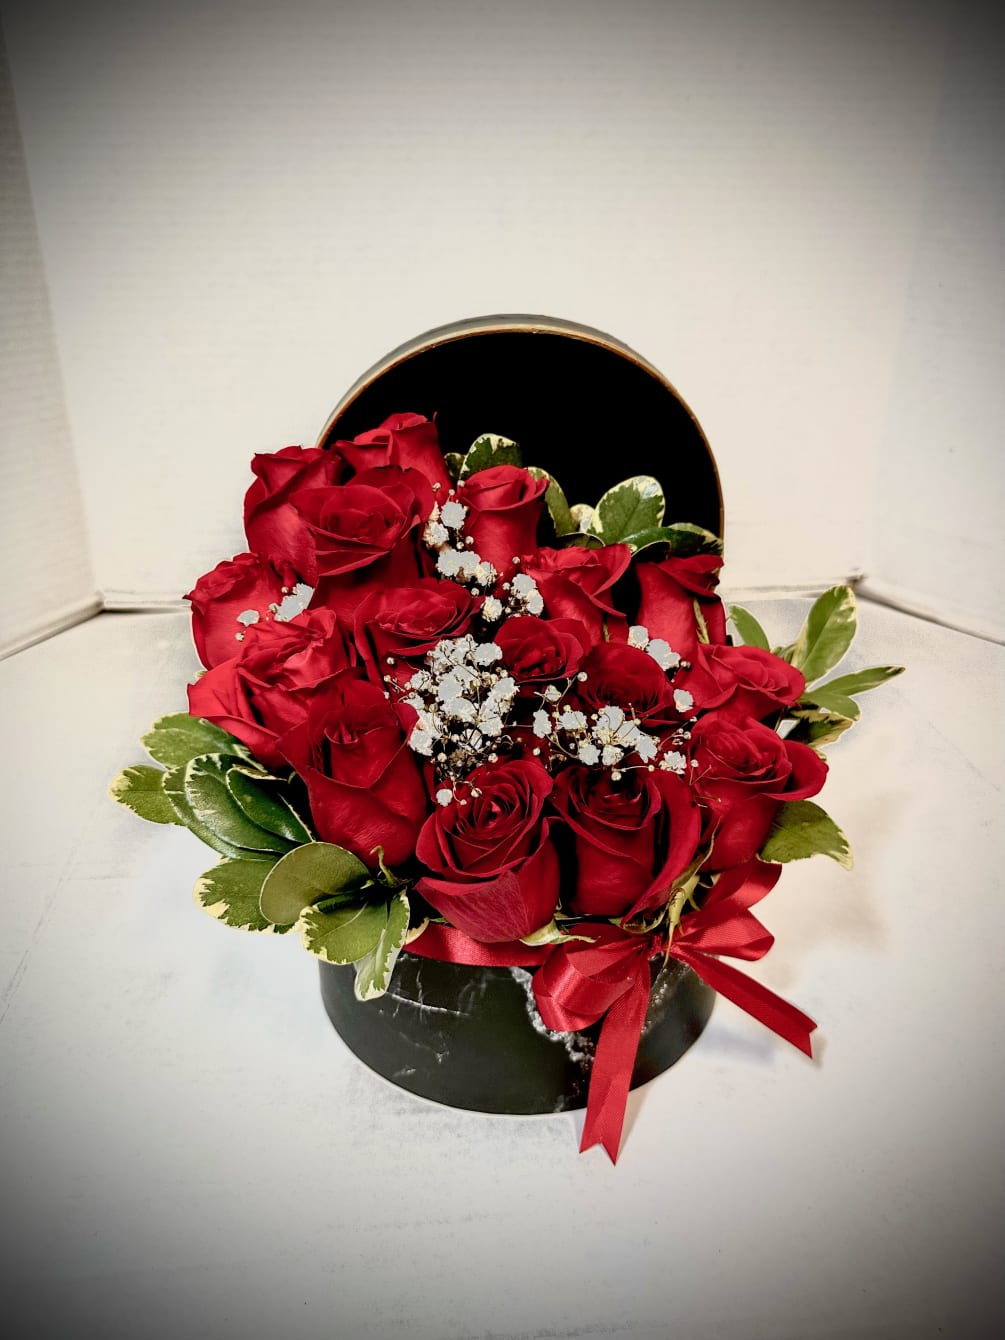 The Blooming Masterpiece Rose Bouquet is a classic expression of love and